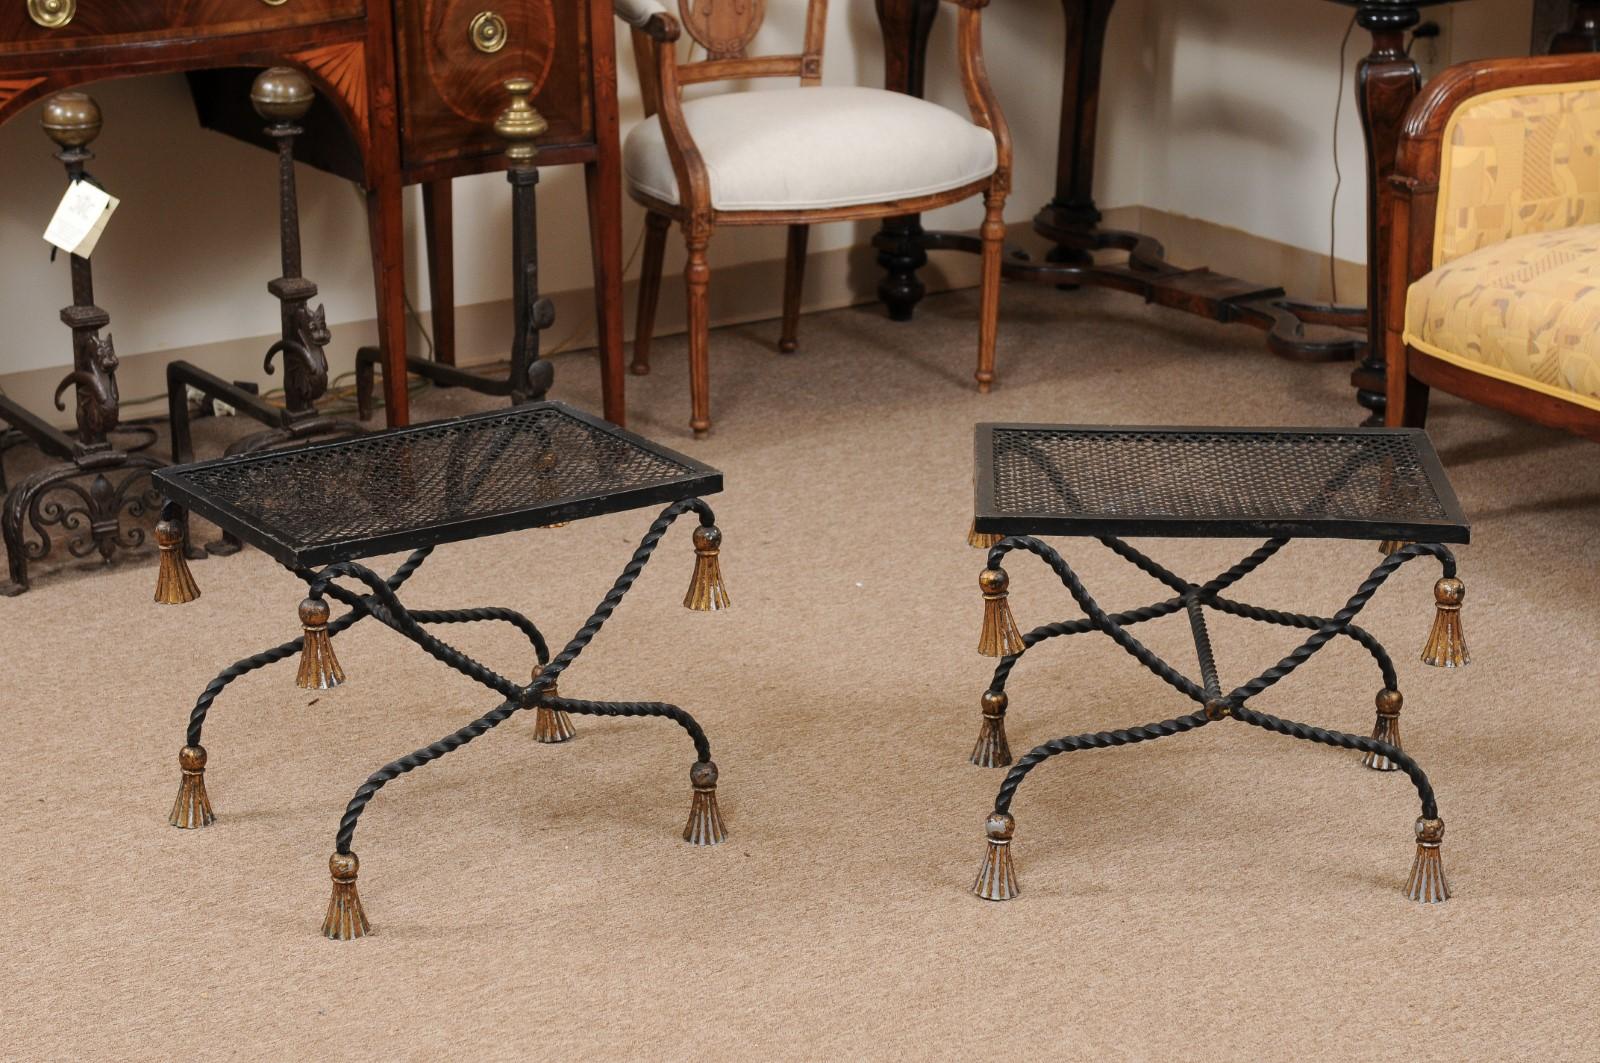 Pair of Vintage Black Painted & Gilt Iron Benches with Tassels, 20th century.